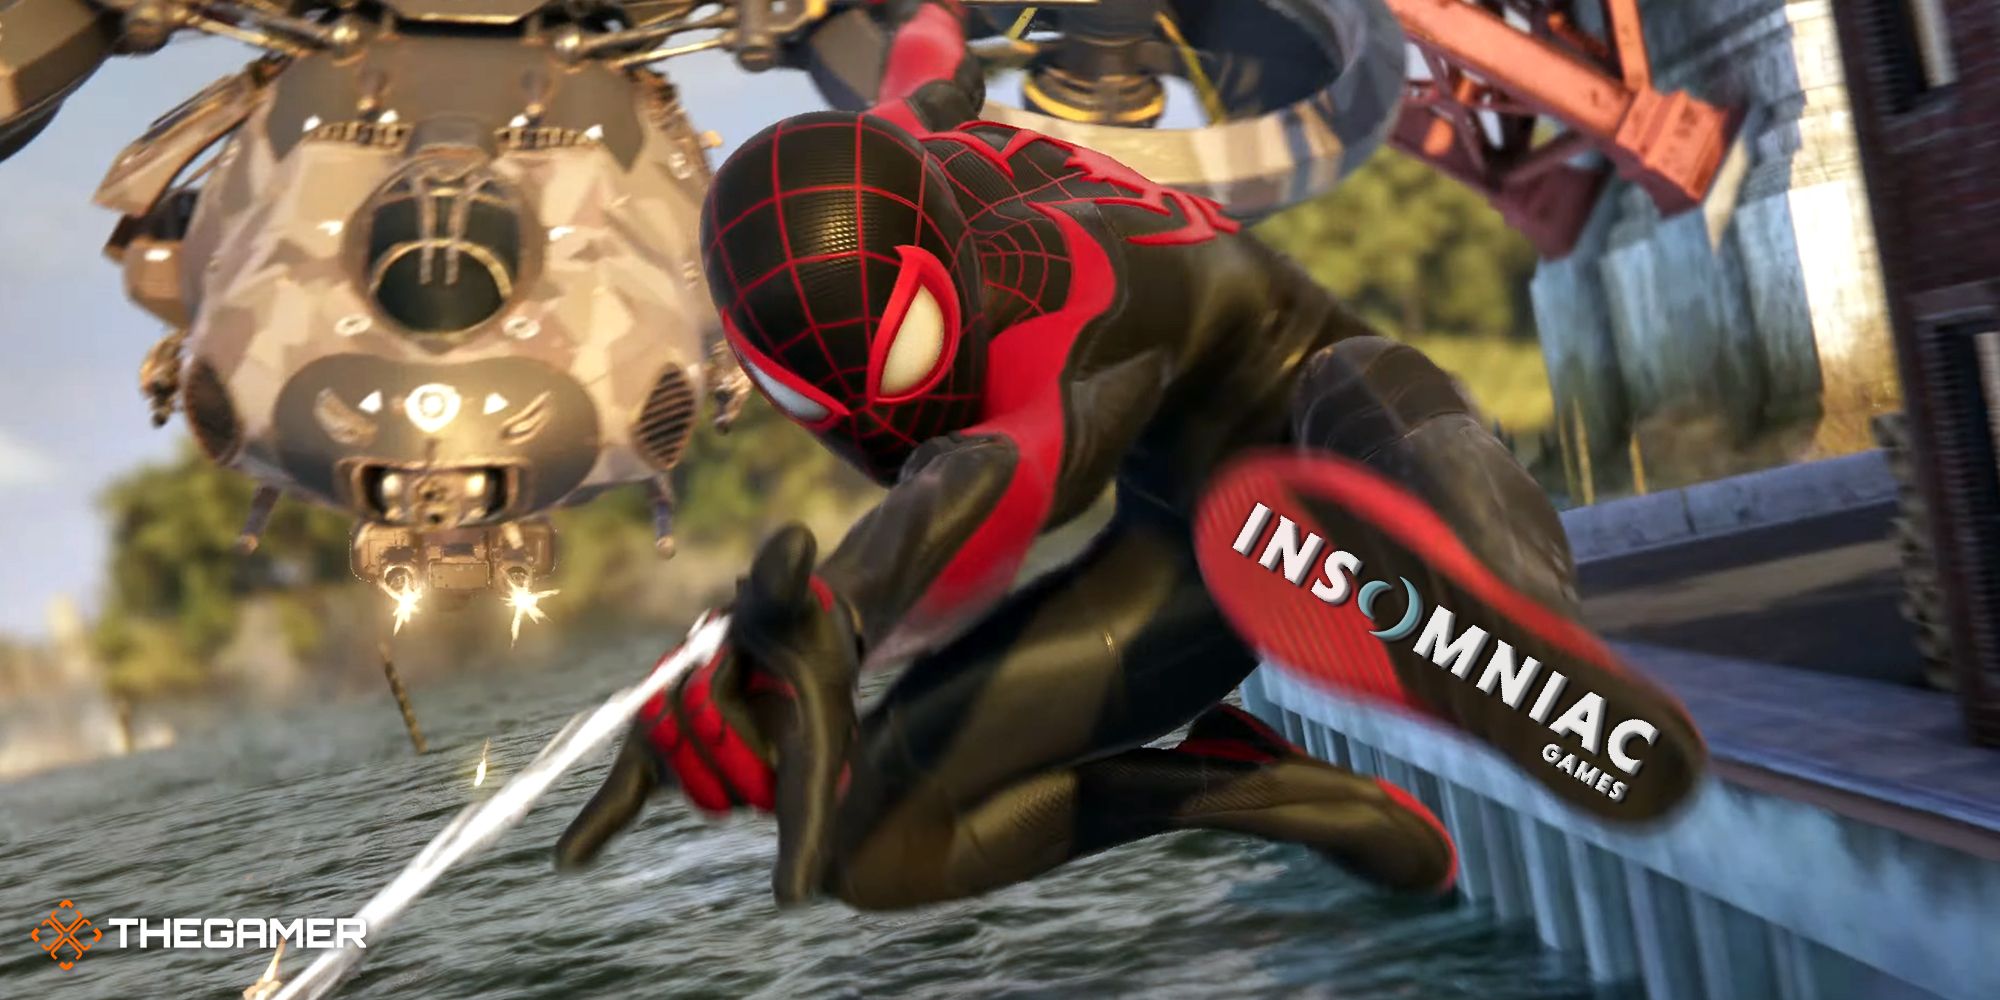 Miles Morales in his suit swinging with a helicopter behind him and the Insomniac logo emblazoned on his foot